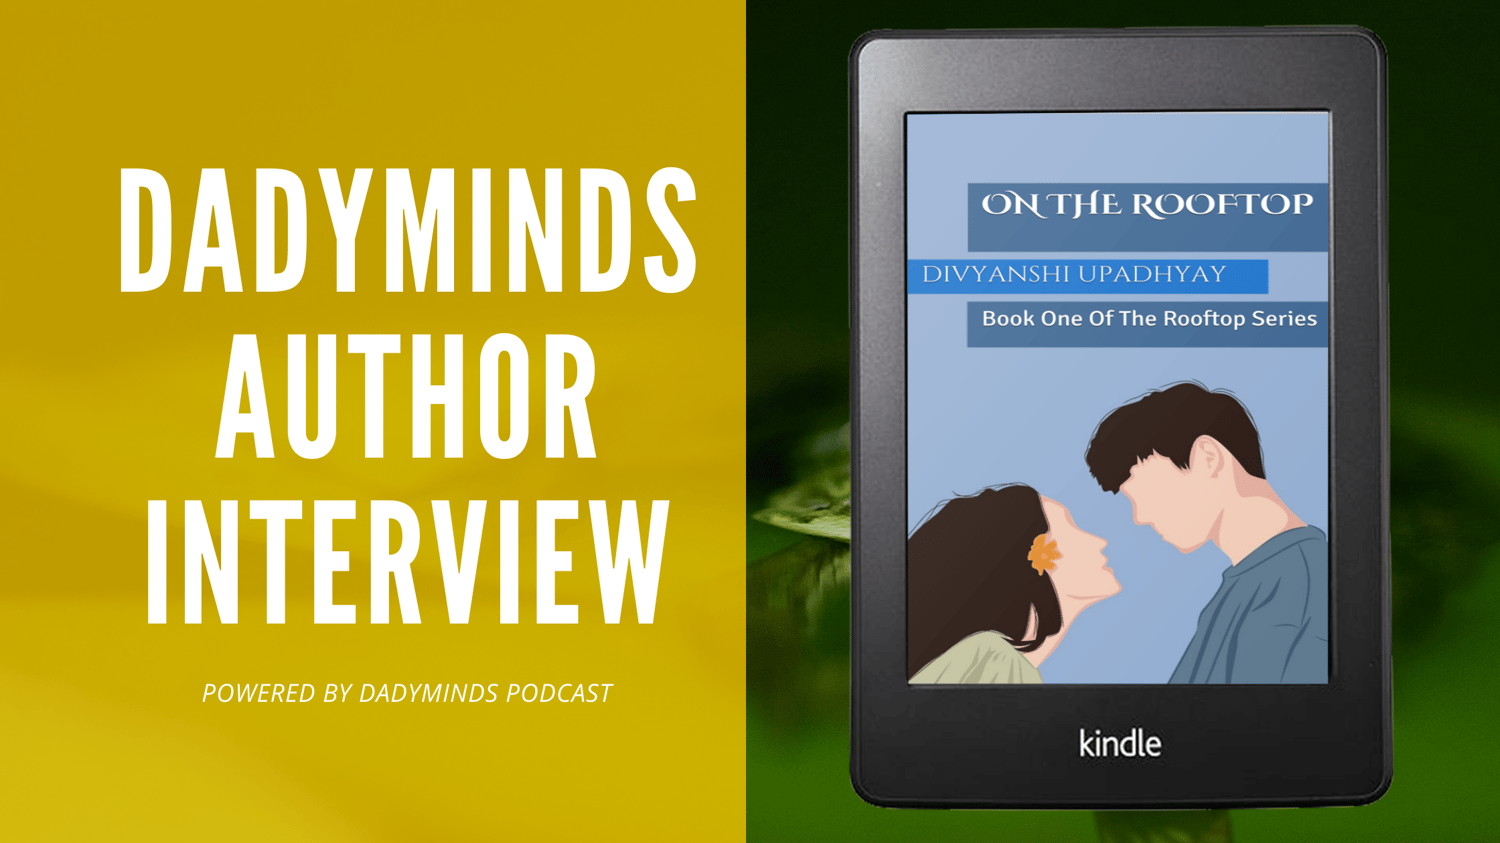 DADYMINDS AUTHOR INTERVIEW WITH DIVYANSHI UPADHYAY